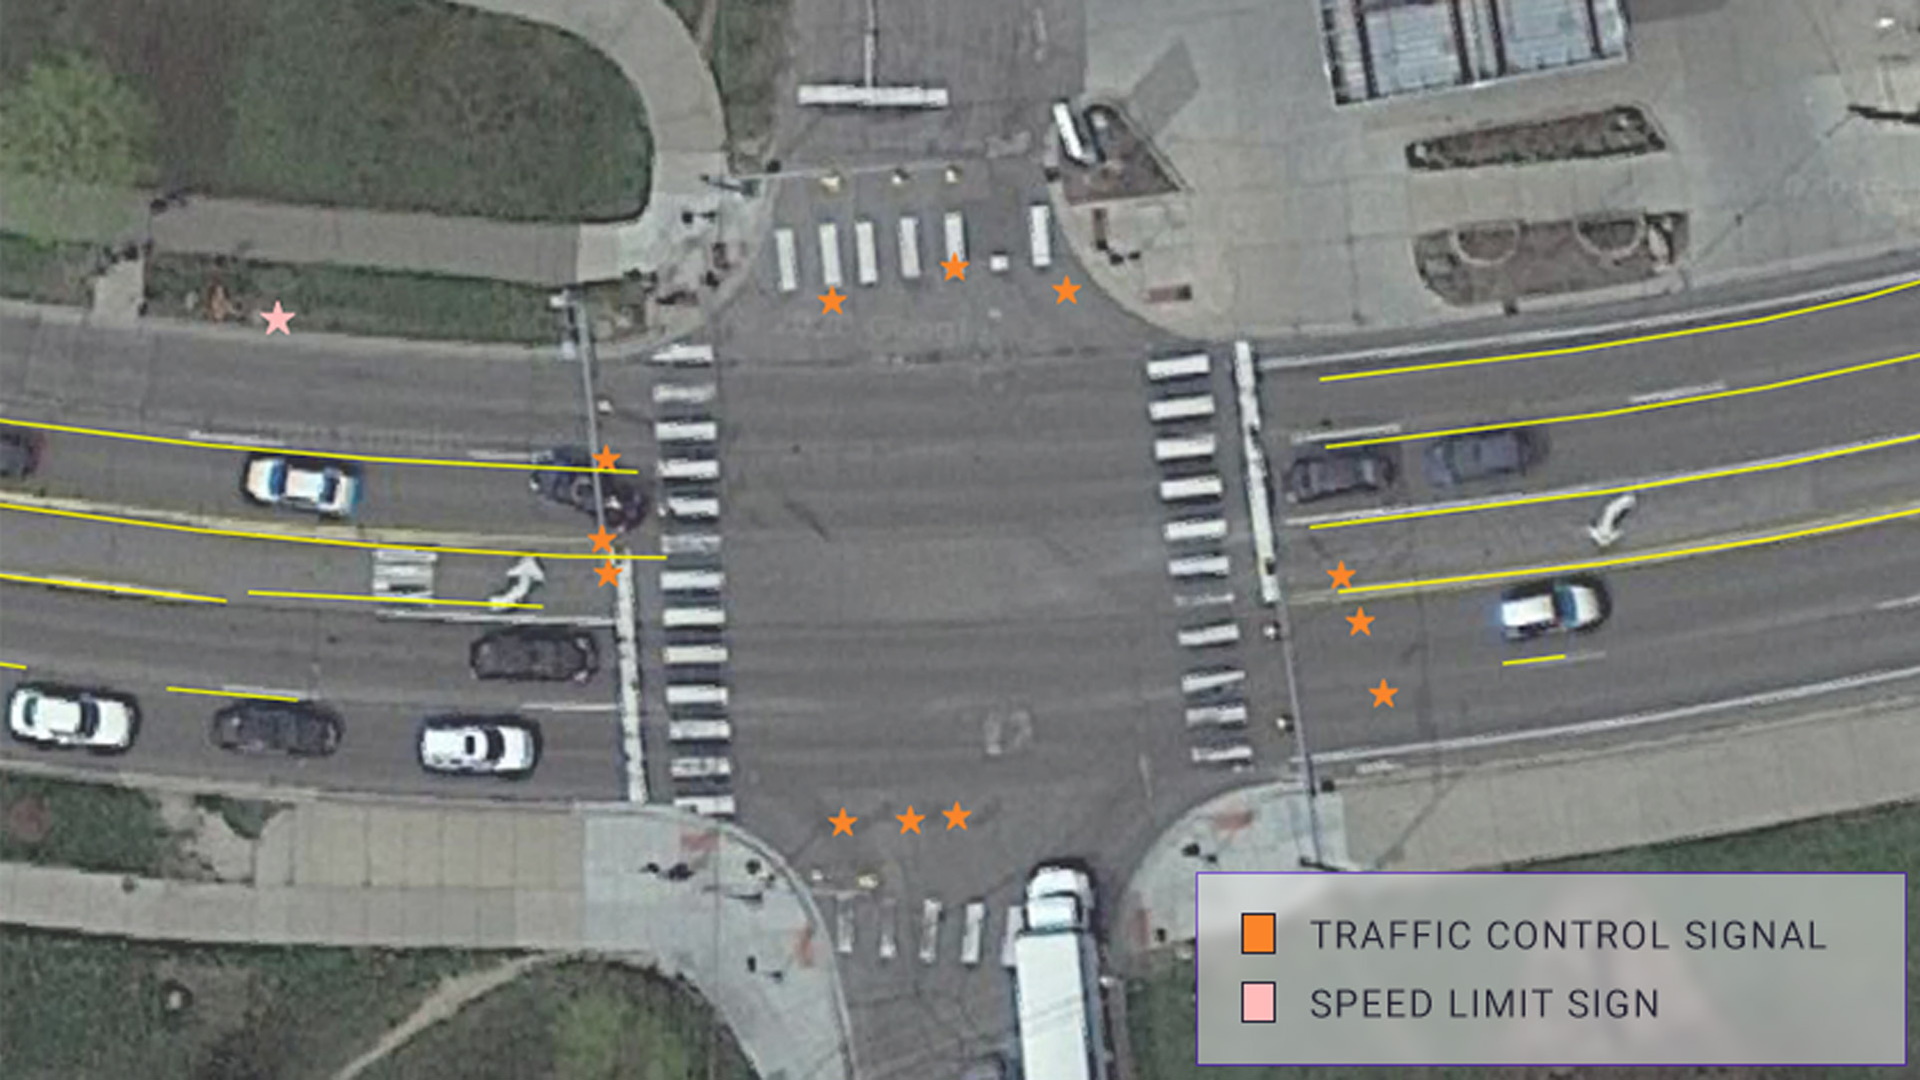 Highly detailed maps for self-driving cars created by satellite imagery